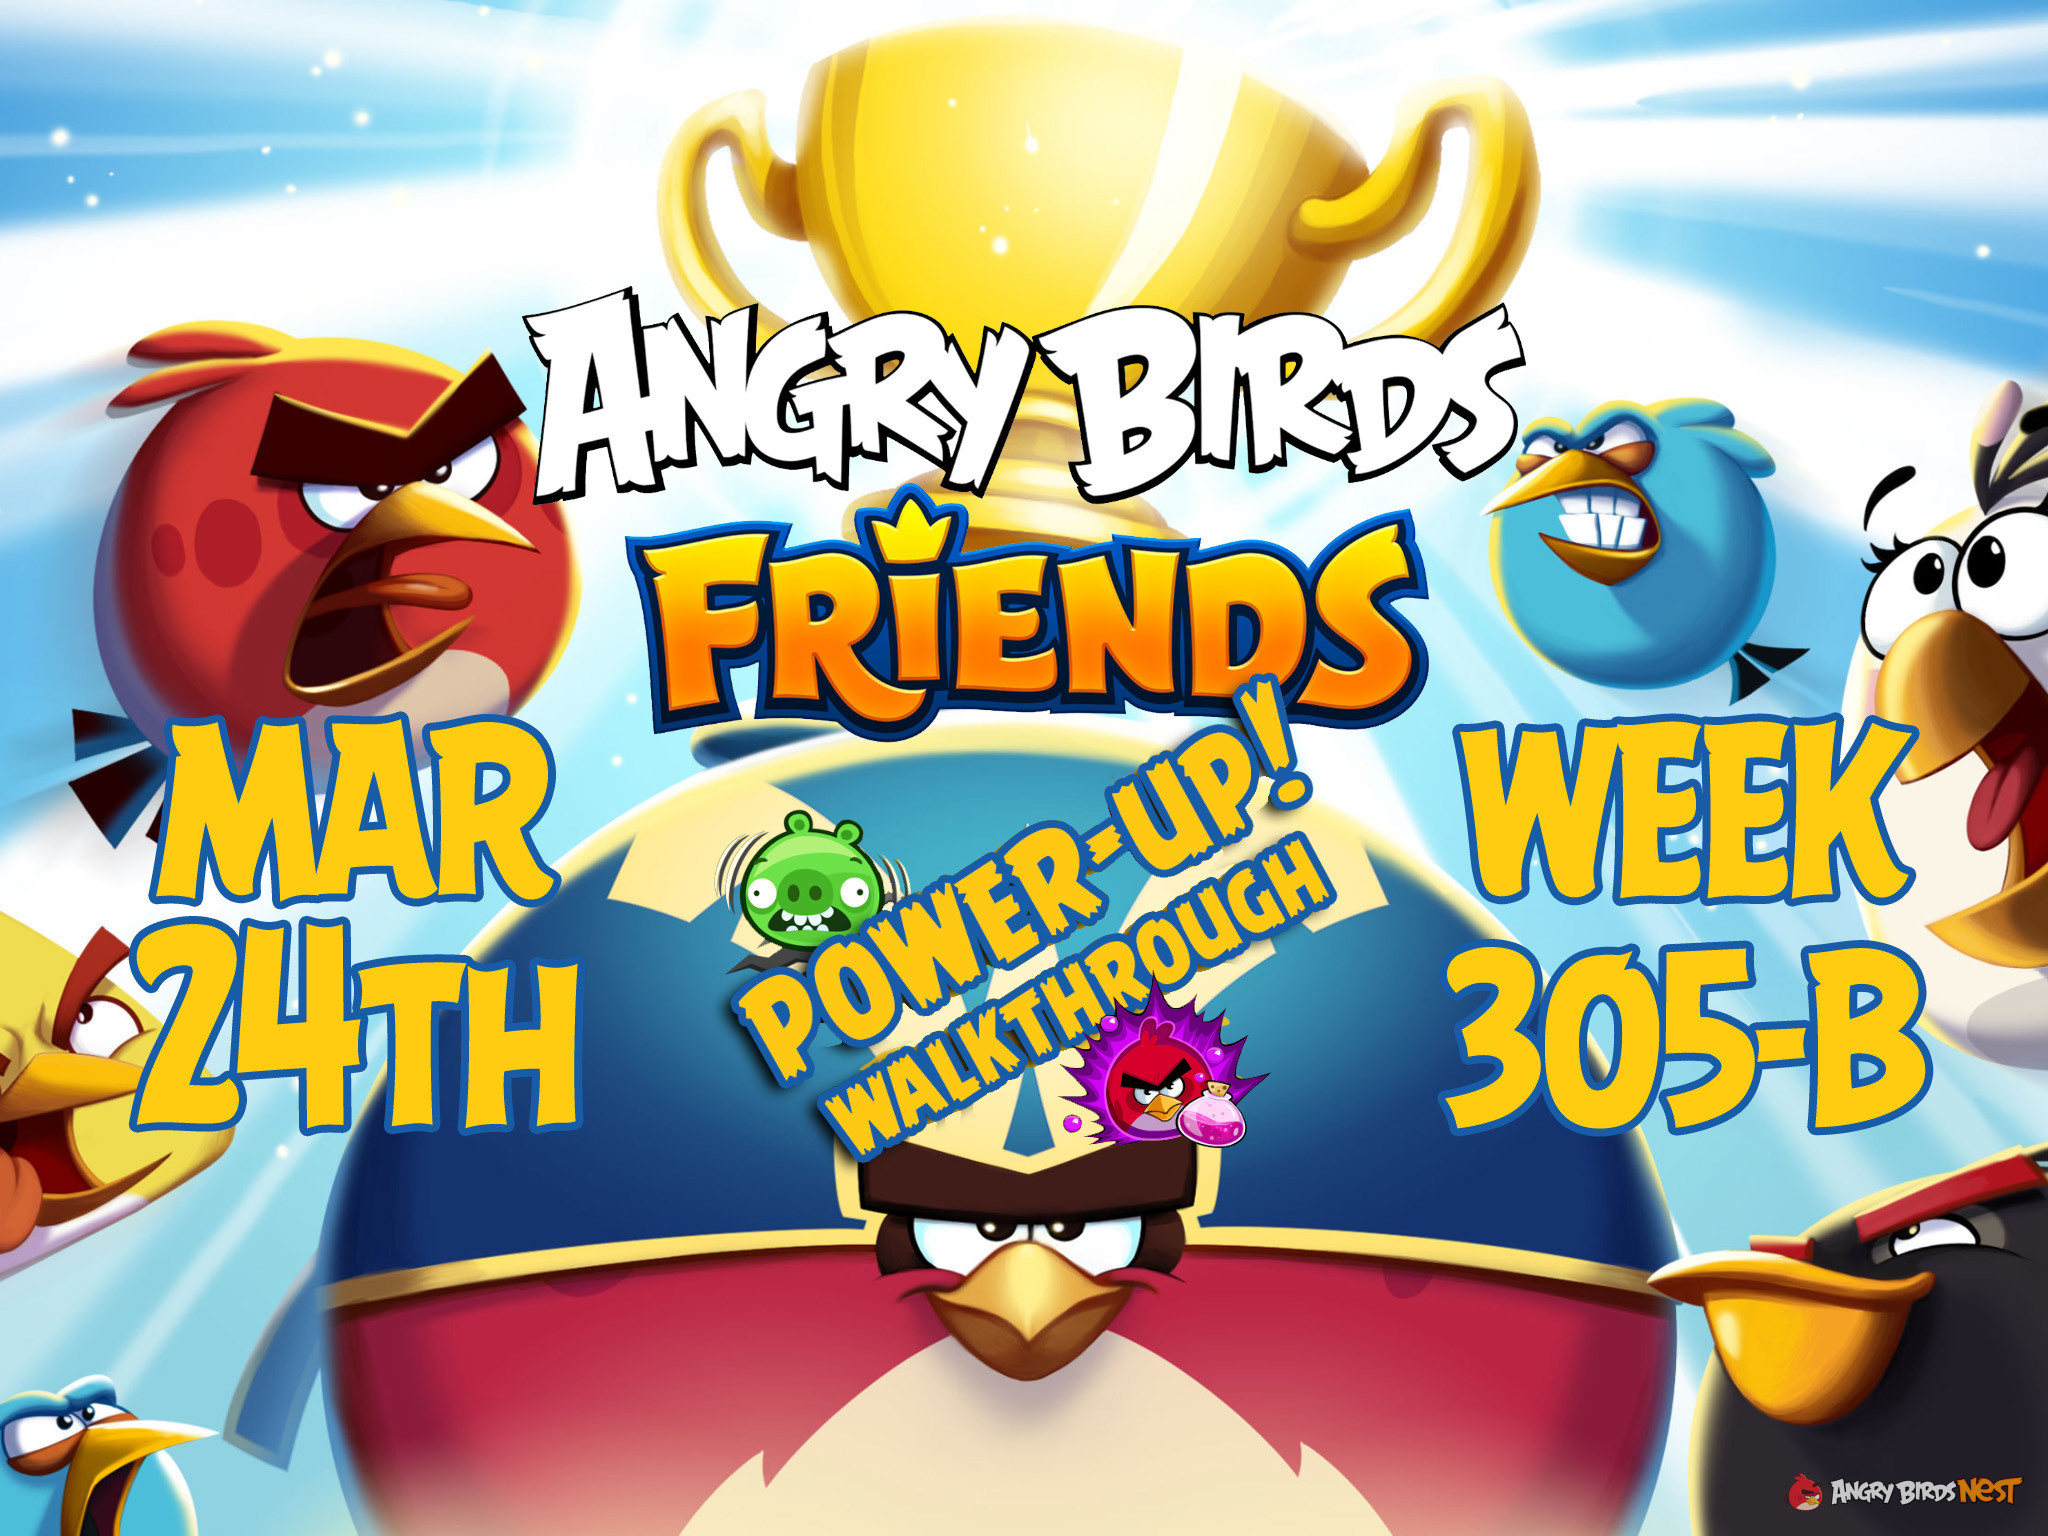 Angry Birds Friends Tournament Week 305-B Feature Image PU